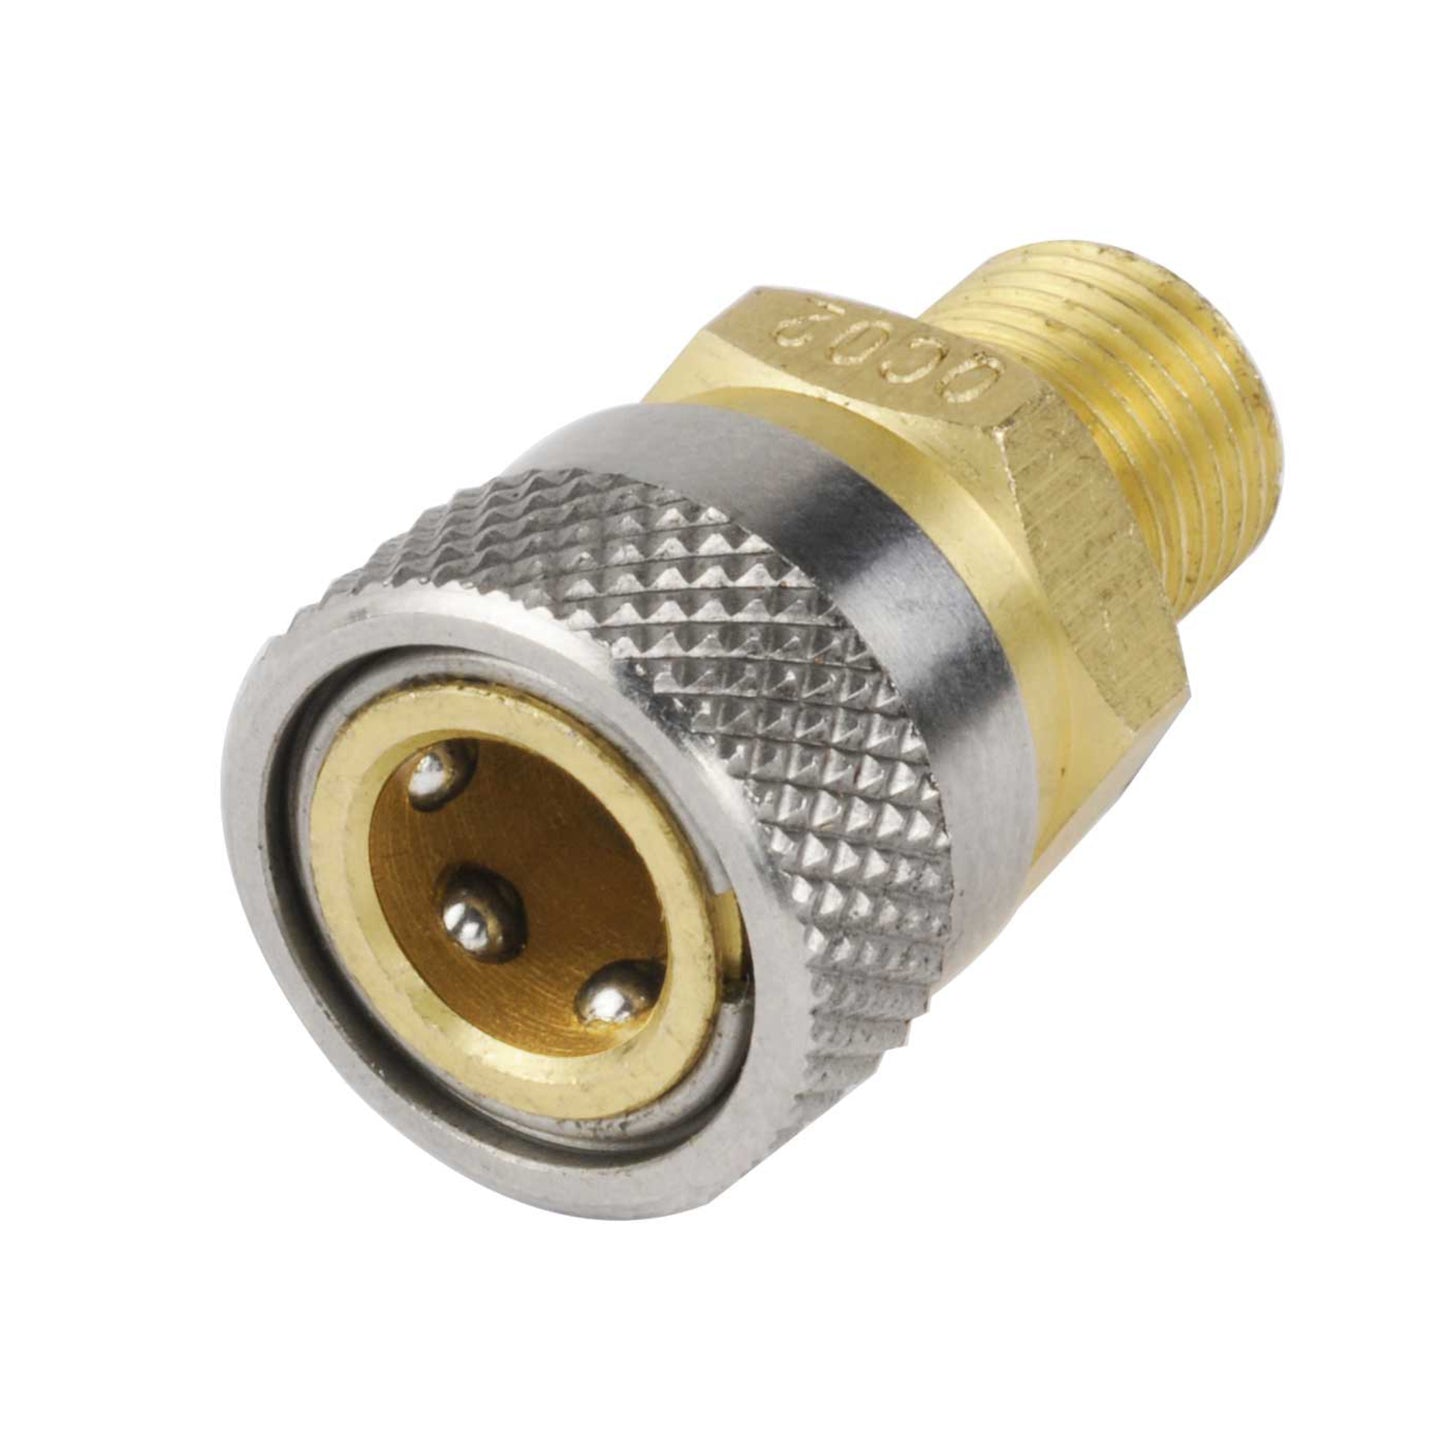 Female Quick Connect to Male 1/8" BSPP Fitting